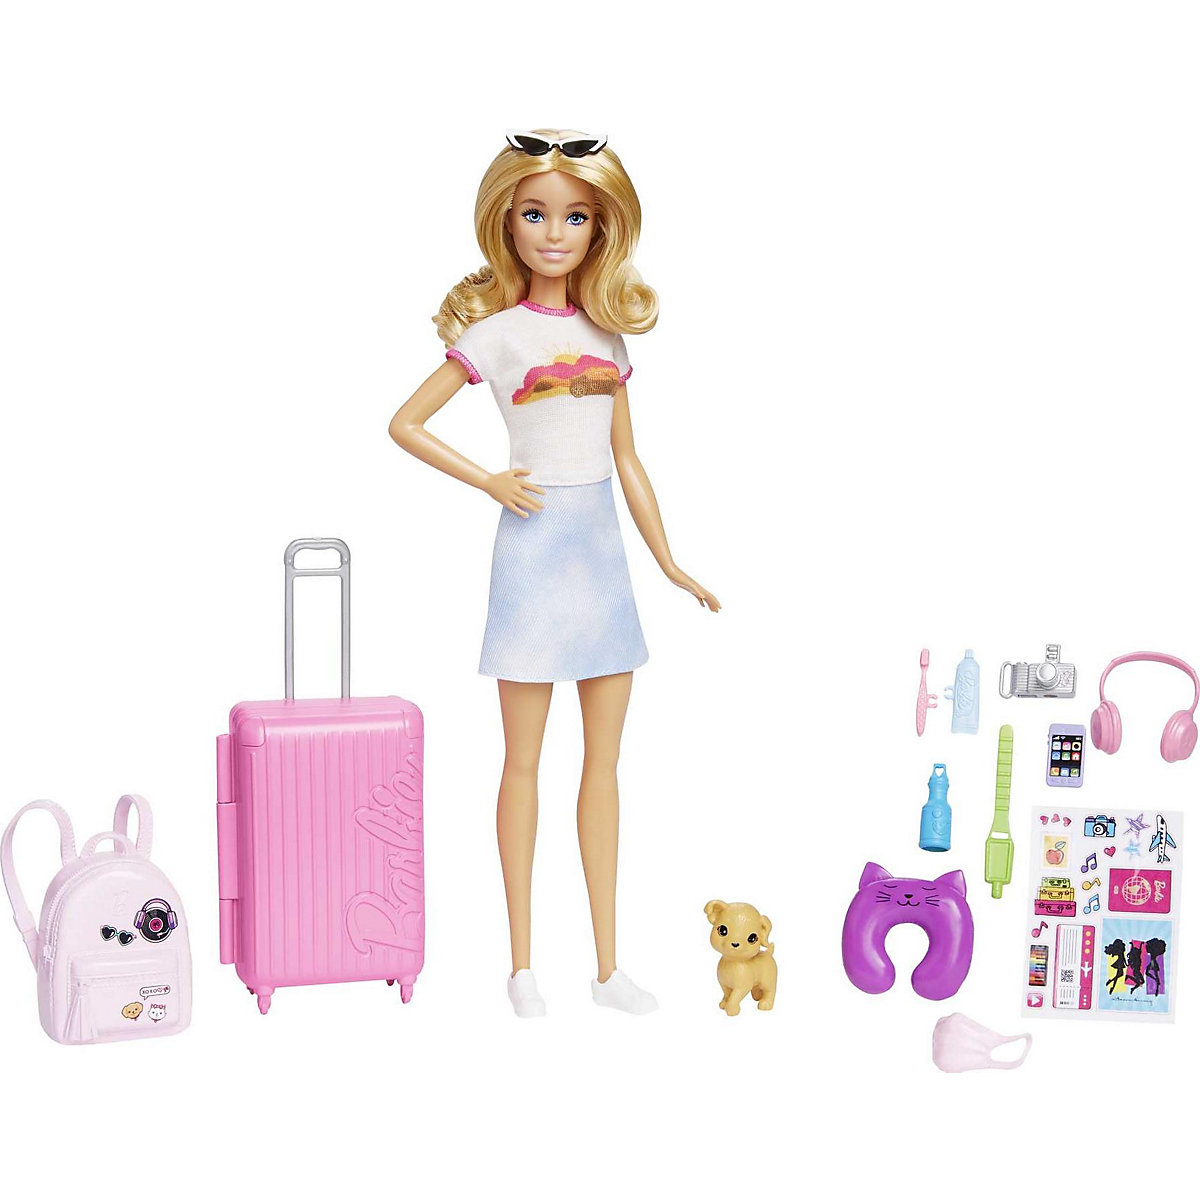 Refreshed Travel Barbie